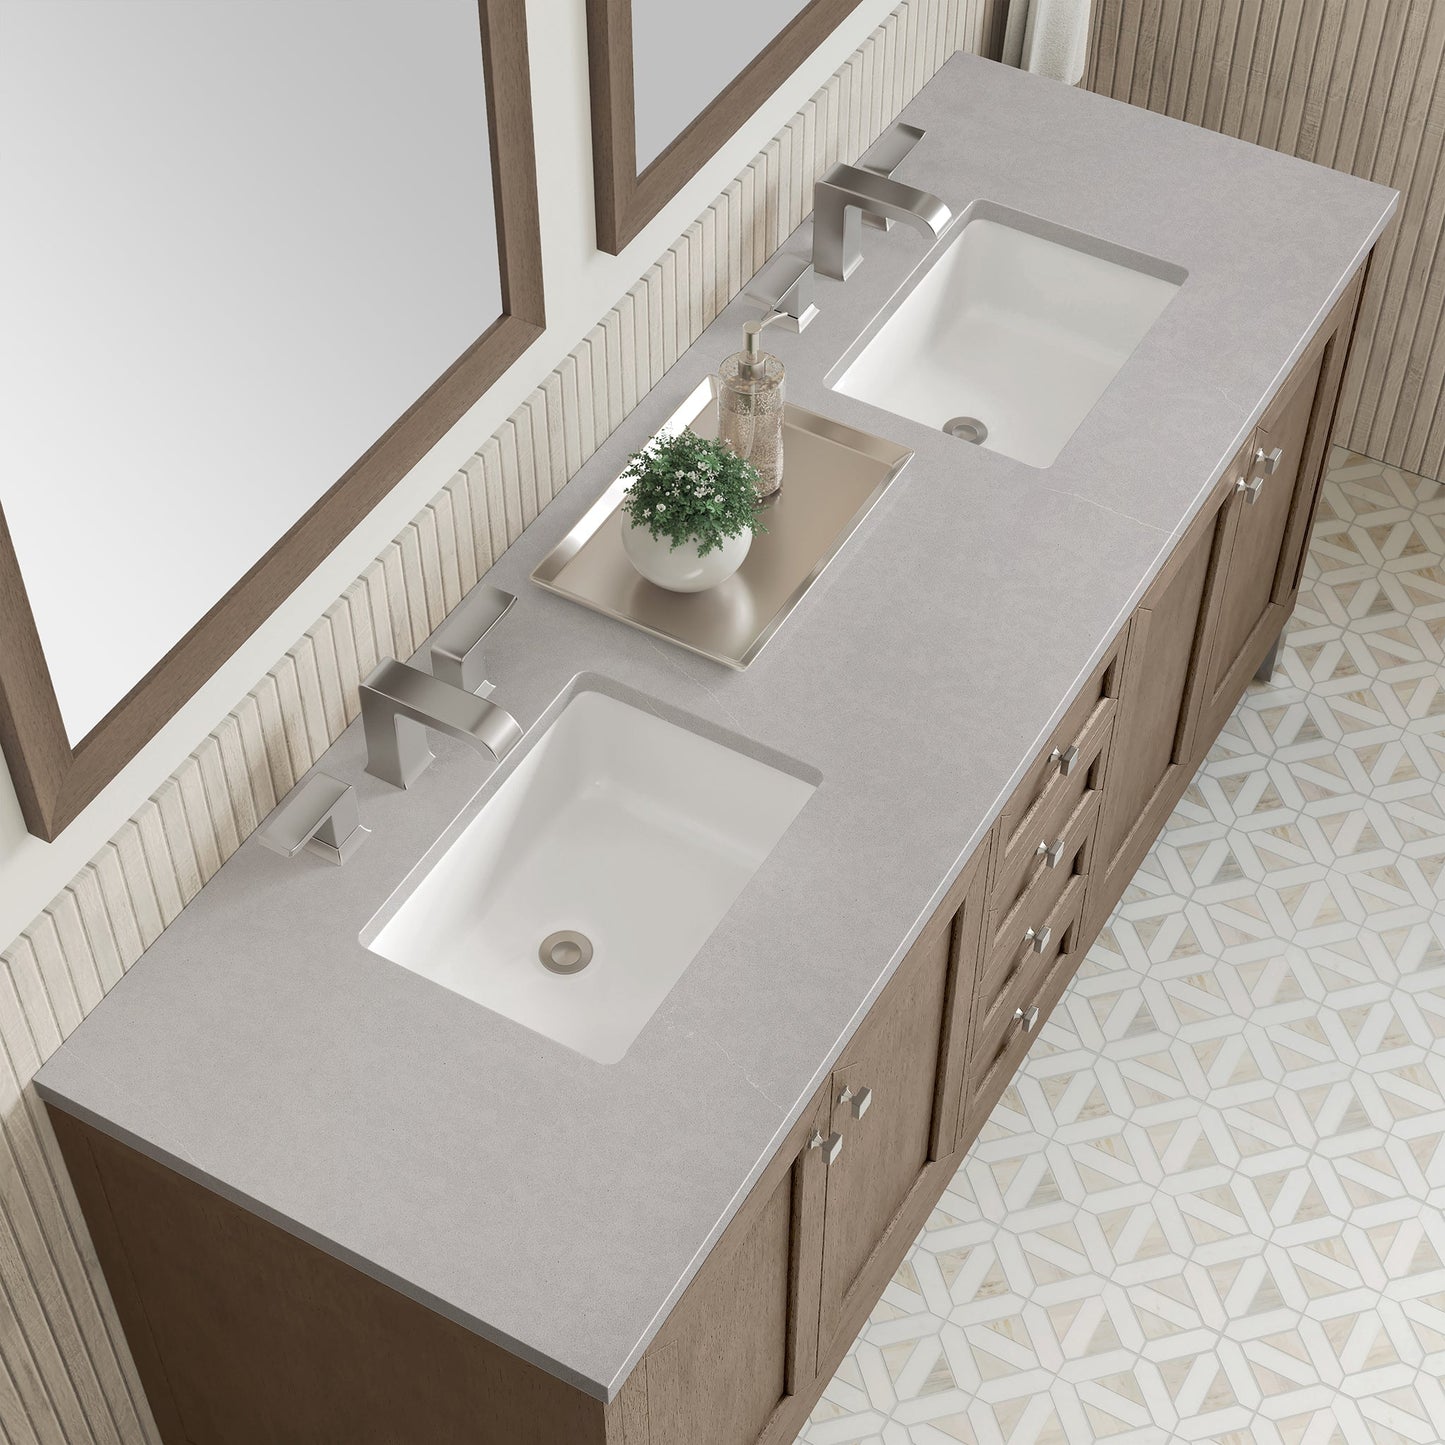 
                  
                    Chicago 72" Double Bathroom Vanity in Whitewashed Walnut Double bathroom Vanity James Martin Vanities 
                  
                